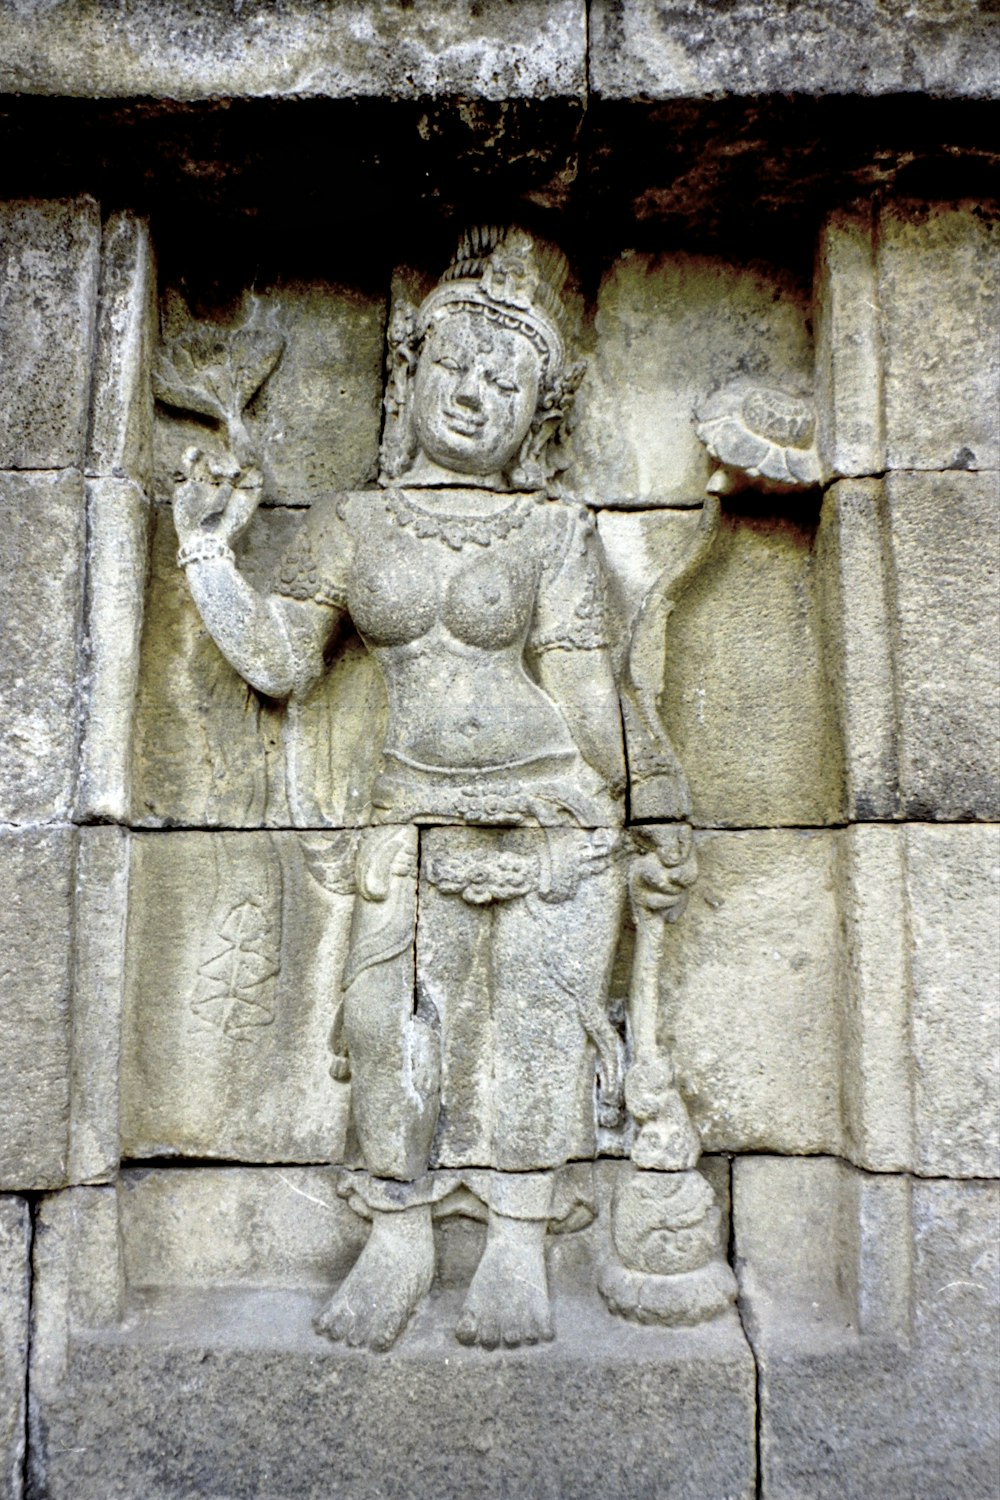 a stone carving of a woman holding a bird